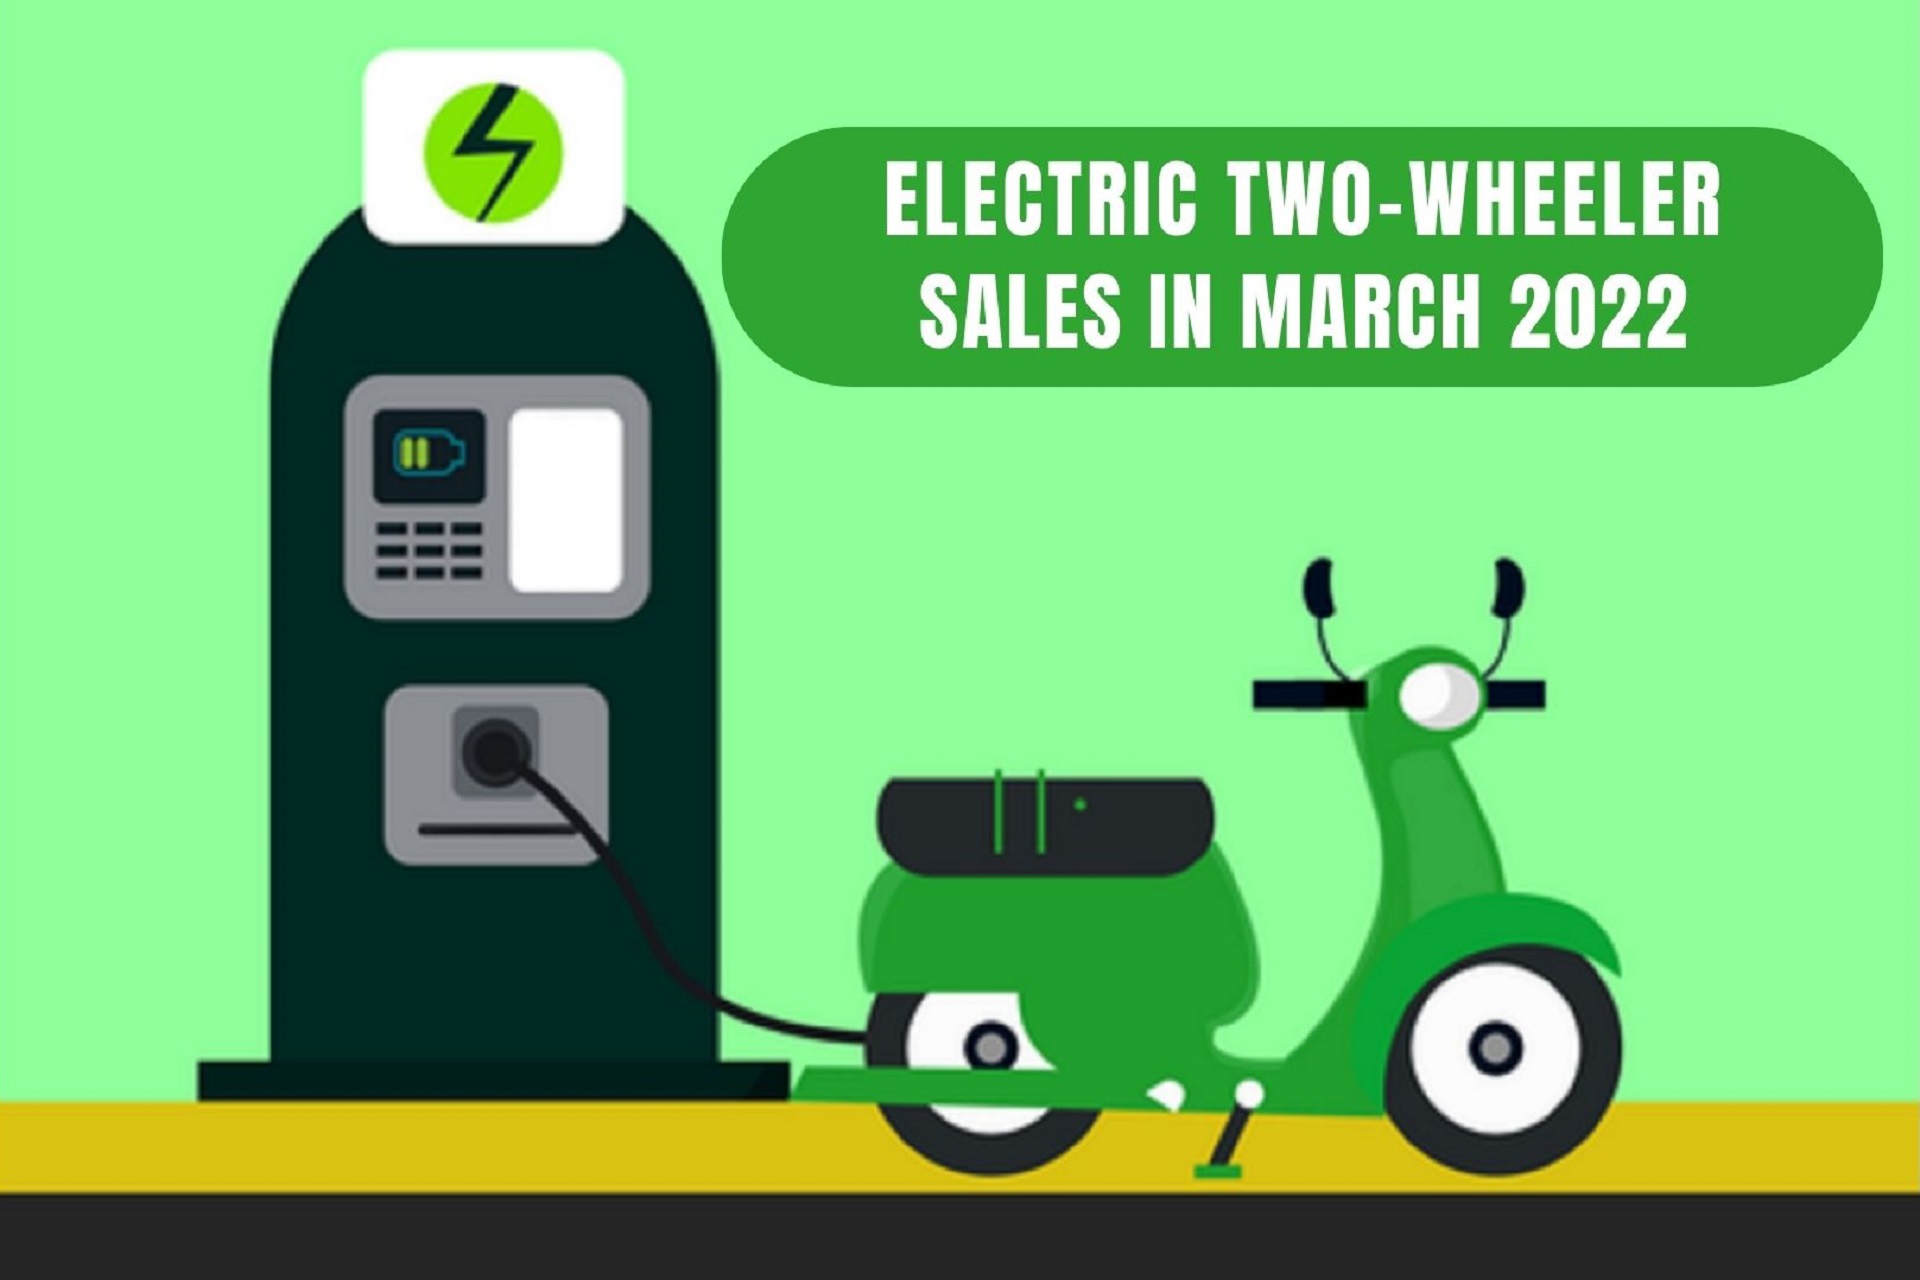 Here Is The Box Office For Electric Two-Wheeler Sales Of The Playing XI In March 2022